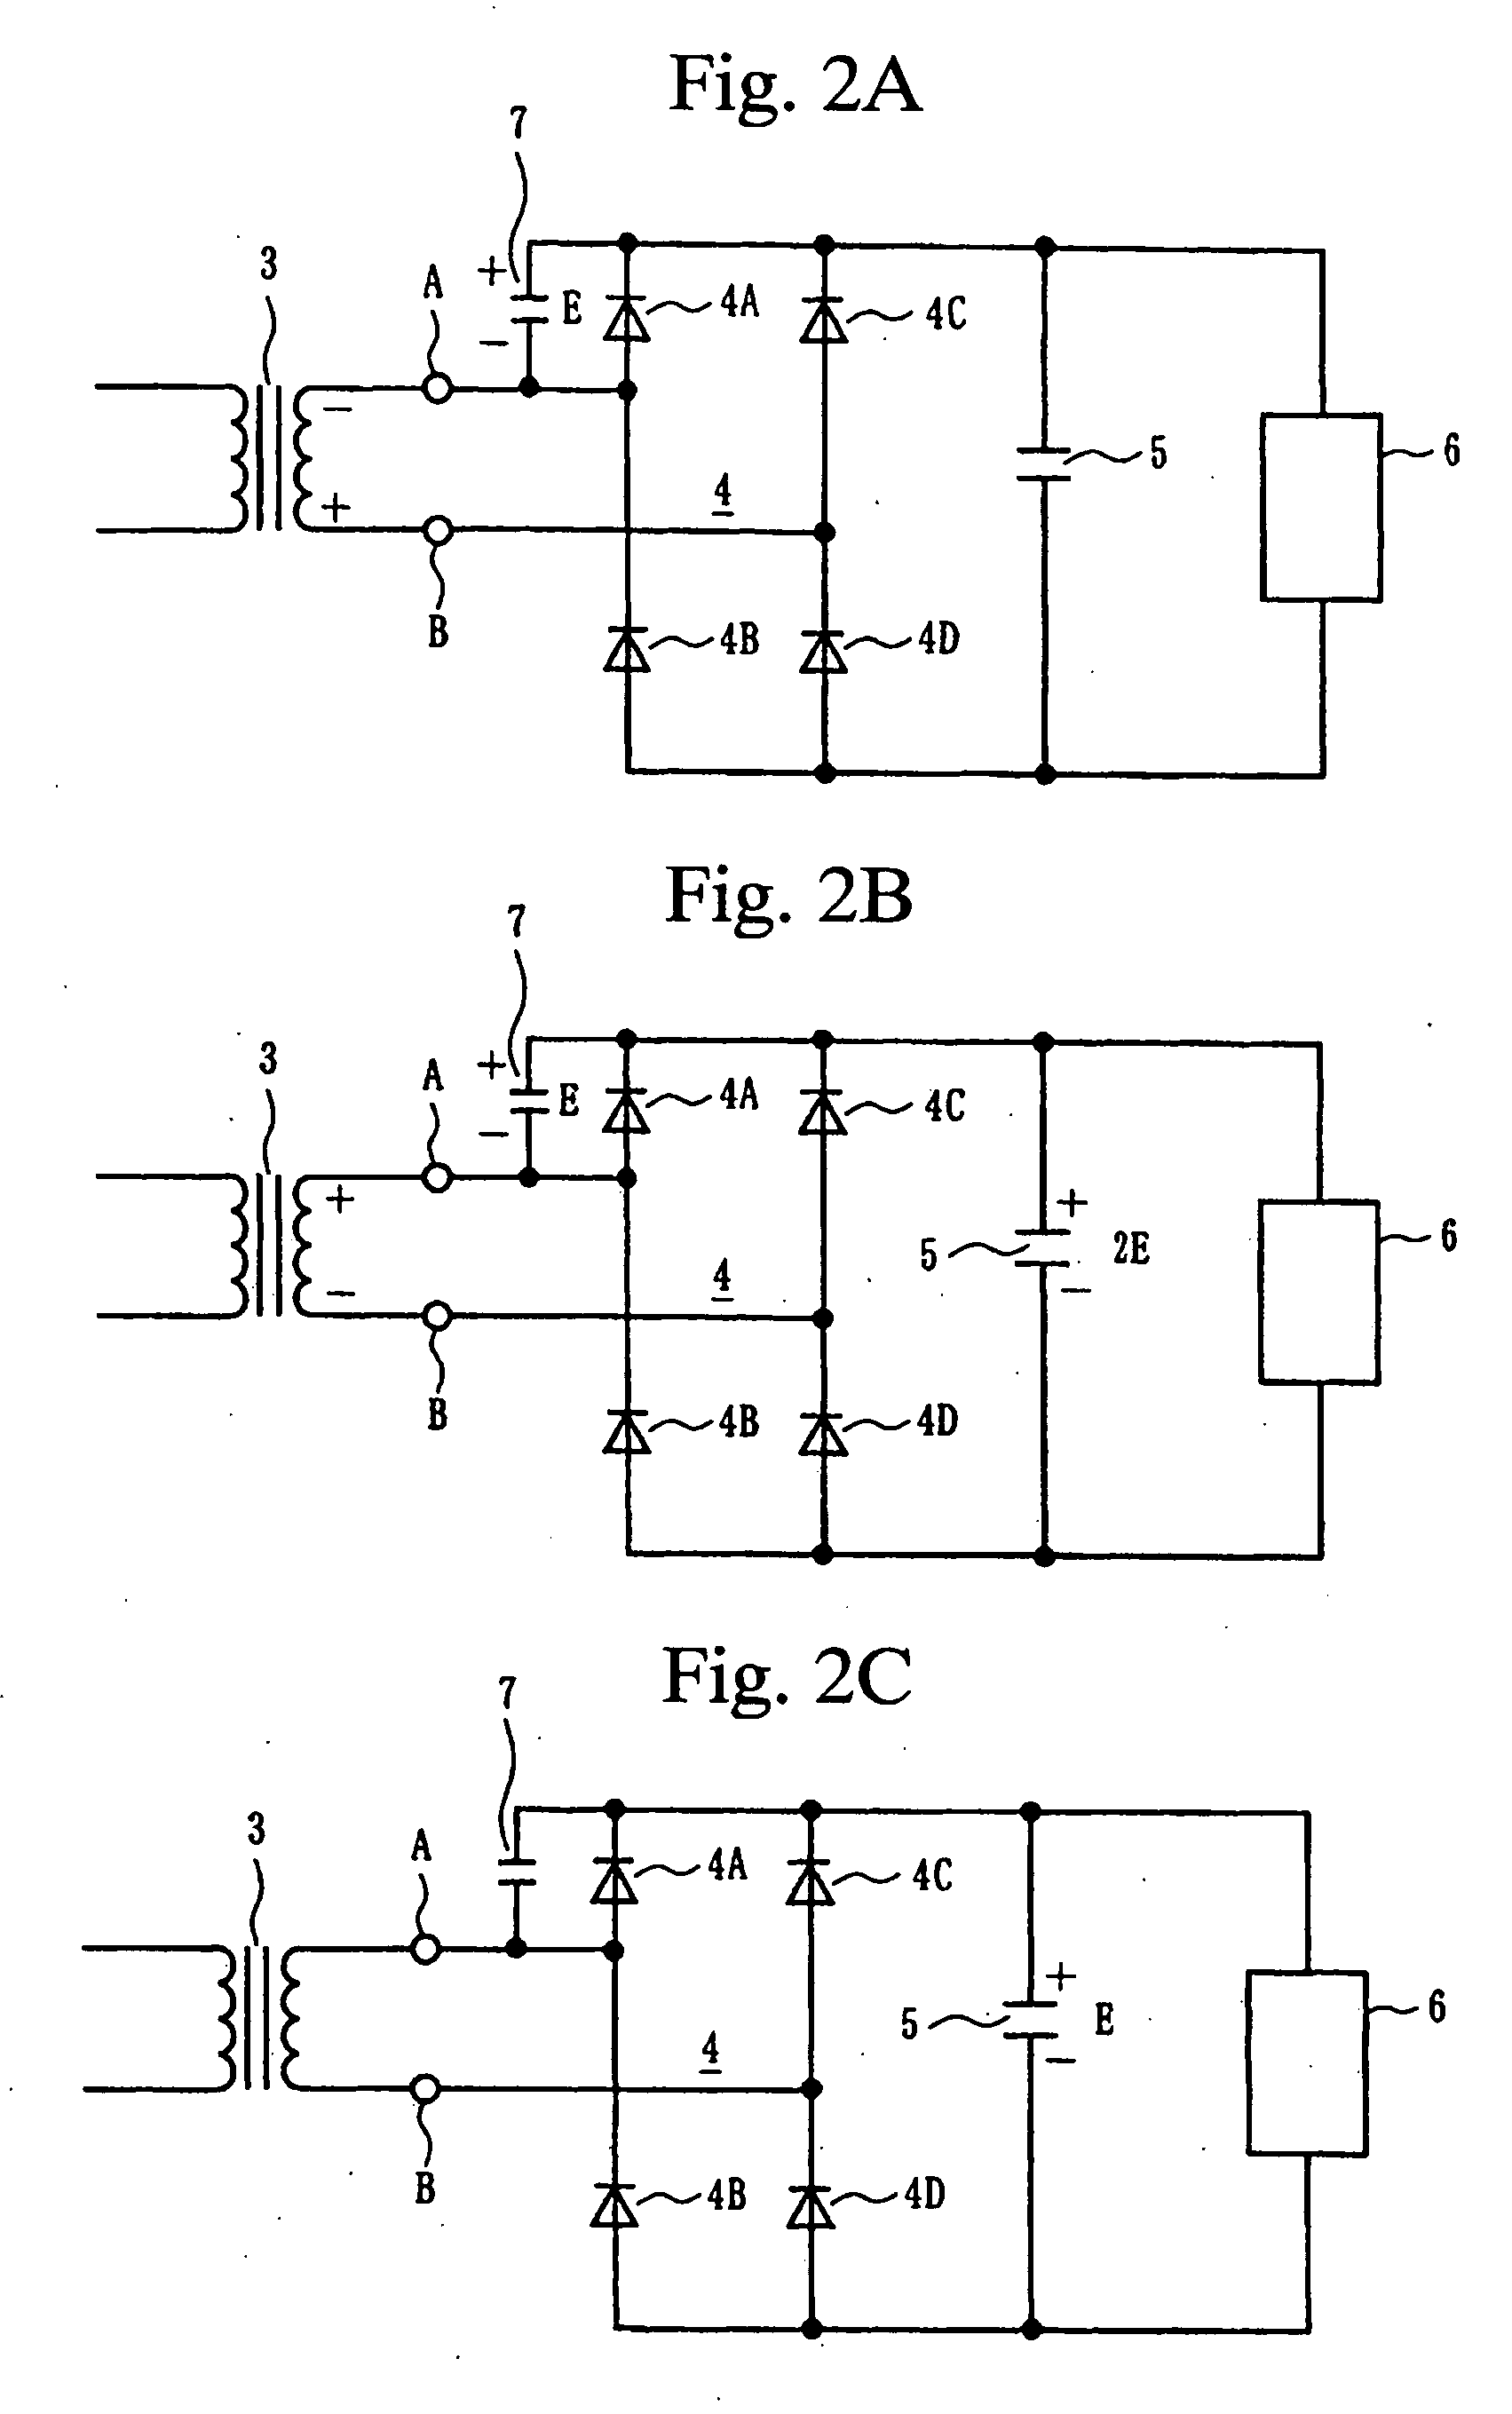 Discharge power supply apparatus